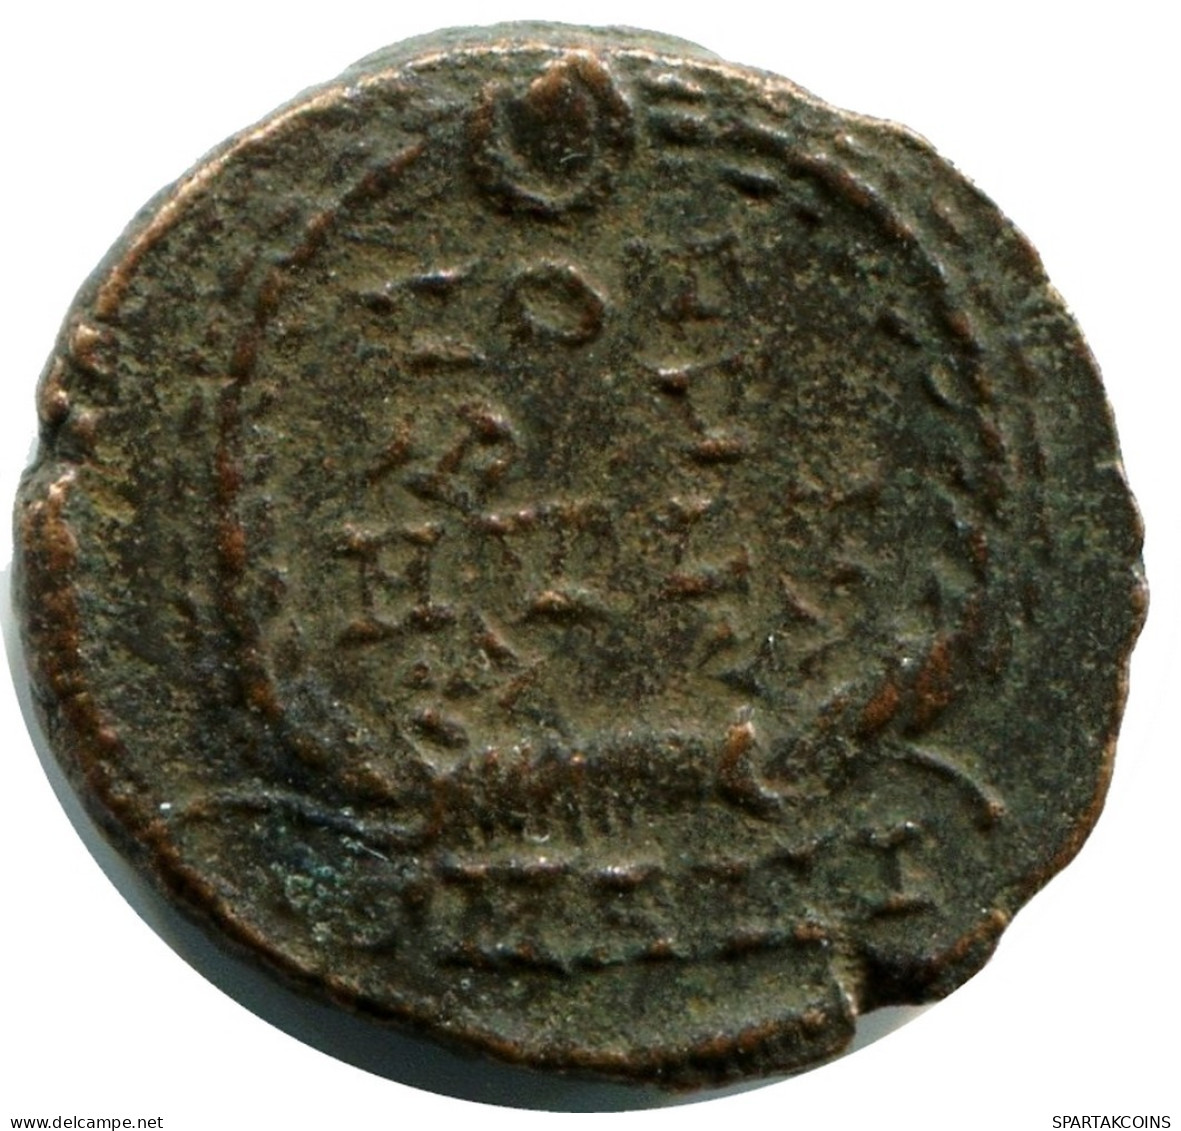 CONSTANS MINTED IN ANTIOCH FROM THE ROYAL ONTARIO MUSEUM #ANC11834.14.D.A - El Imperio Christiano (307 / 363)